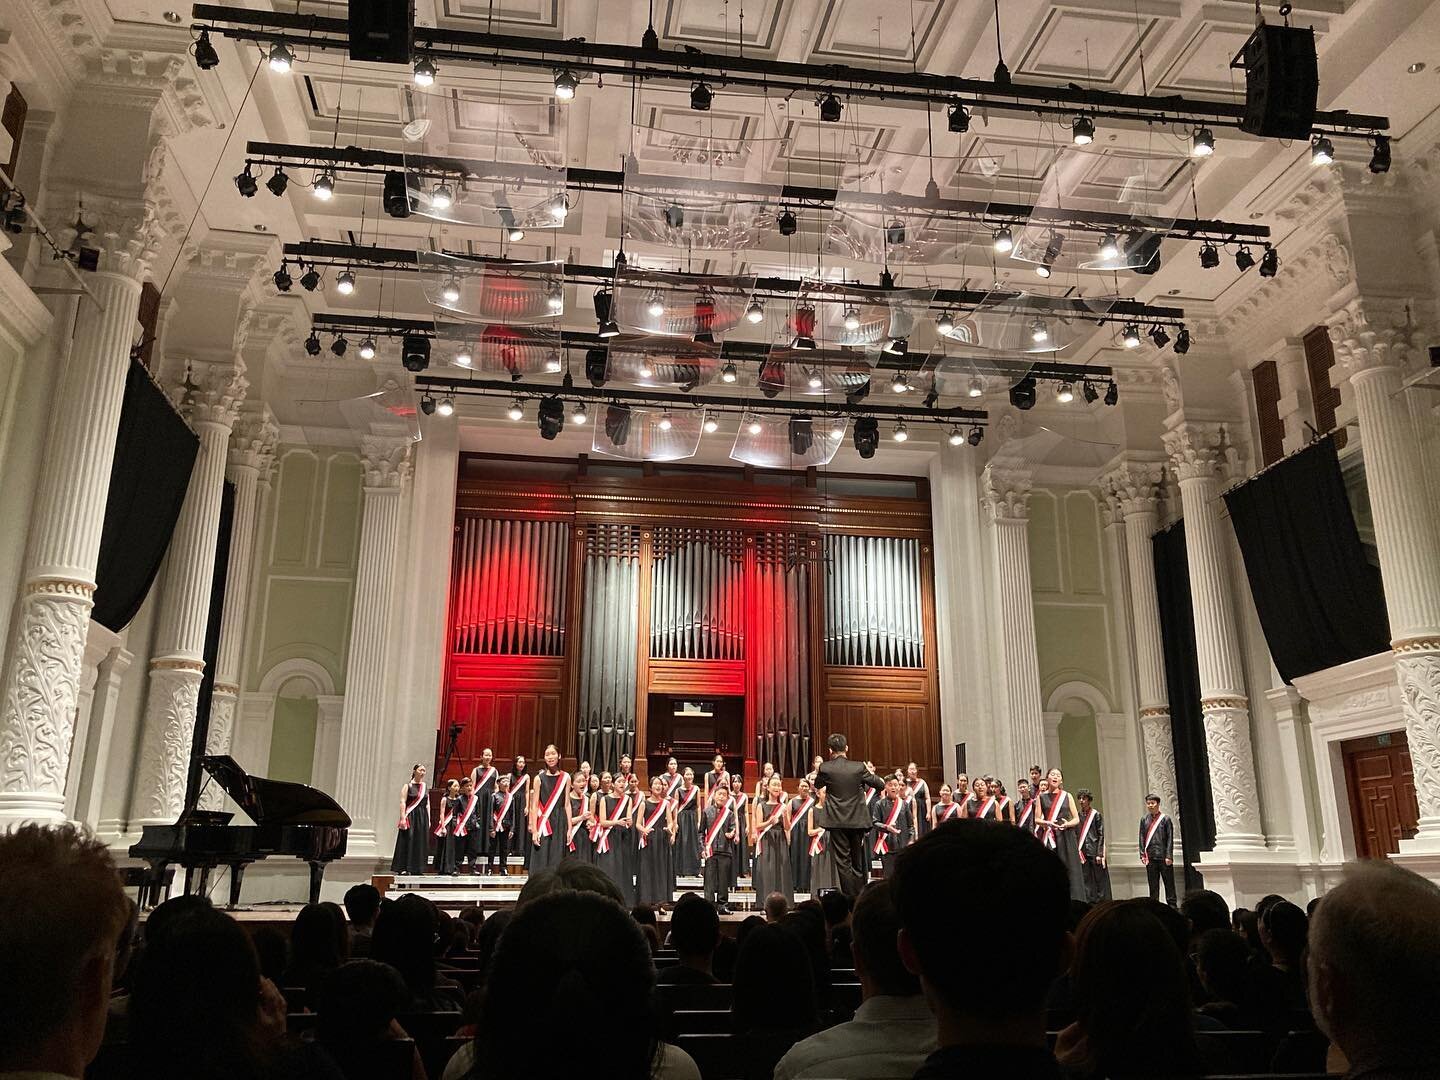 Bravo @voicesofsingapore Children&rsquo;s Choir!! 👏🏻👏🏻 It was such a lovely concert. Thank you for premiering my work and bringing it to life! 
My heartfelt thanks and gratitude to @dariuslim_official for this wonderful opportunity and all who ha